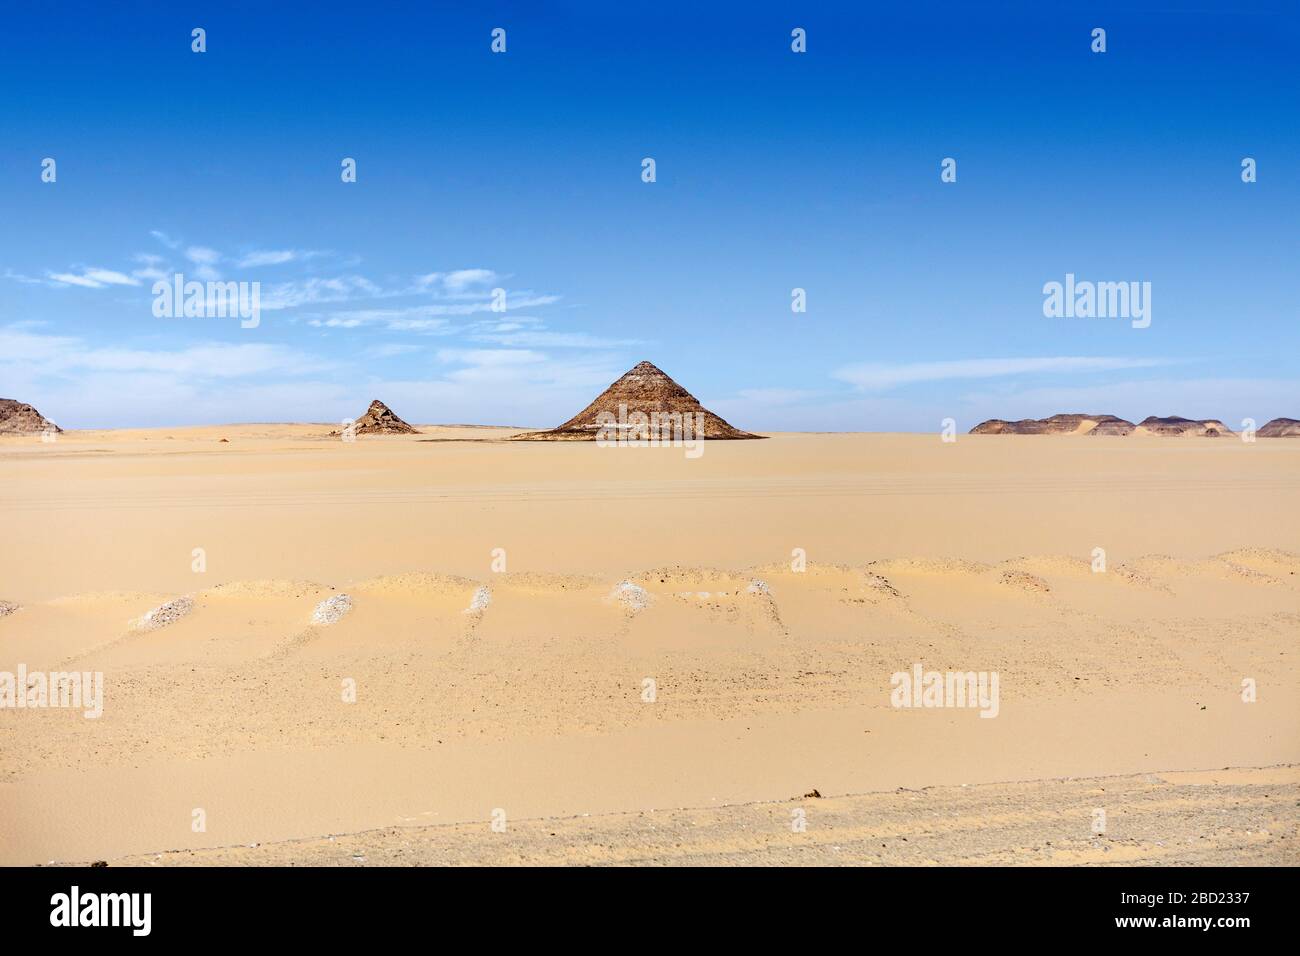 Natural pyramids formed by rocks in the desert between Luxor and Abu Simbel, Egypt Stock Photo